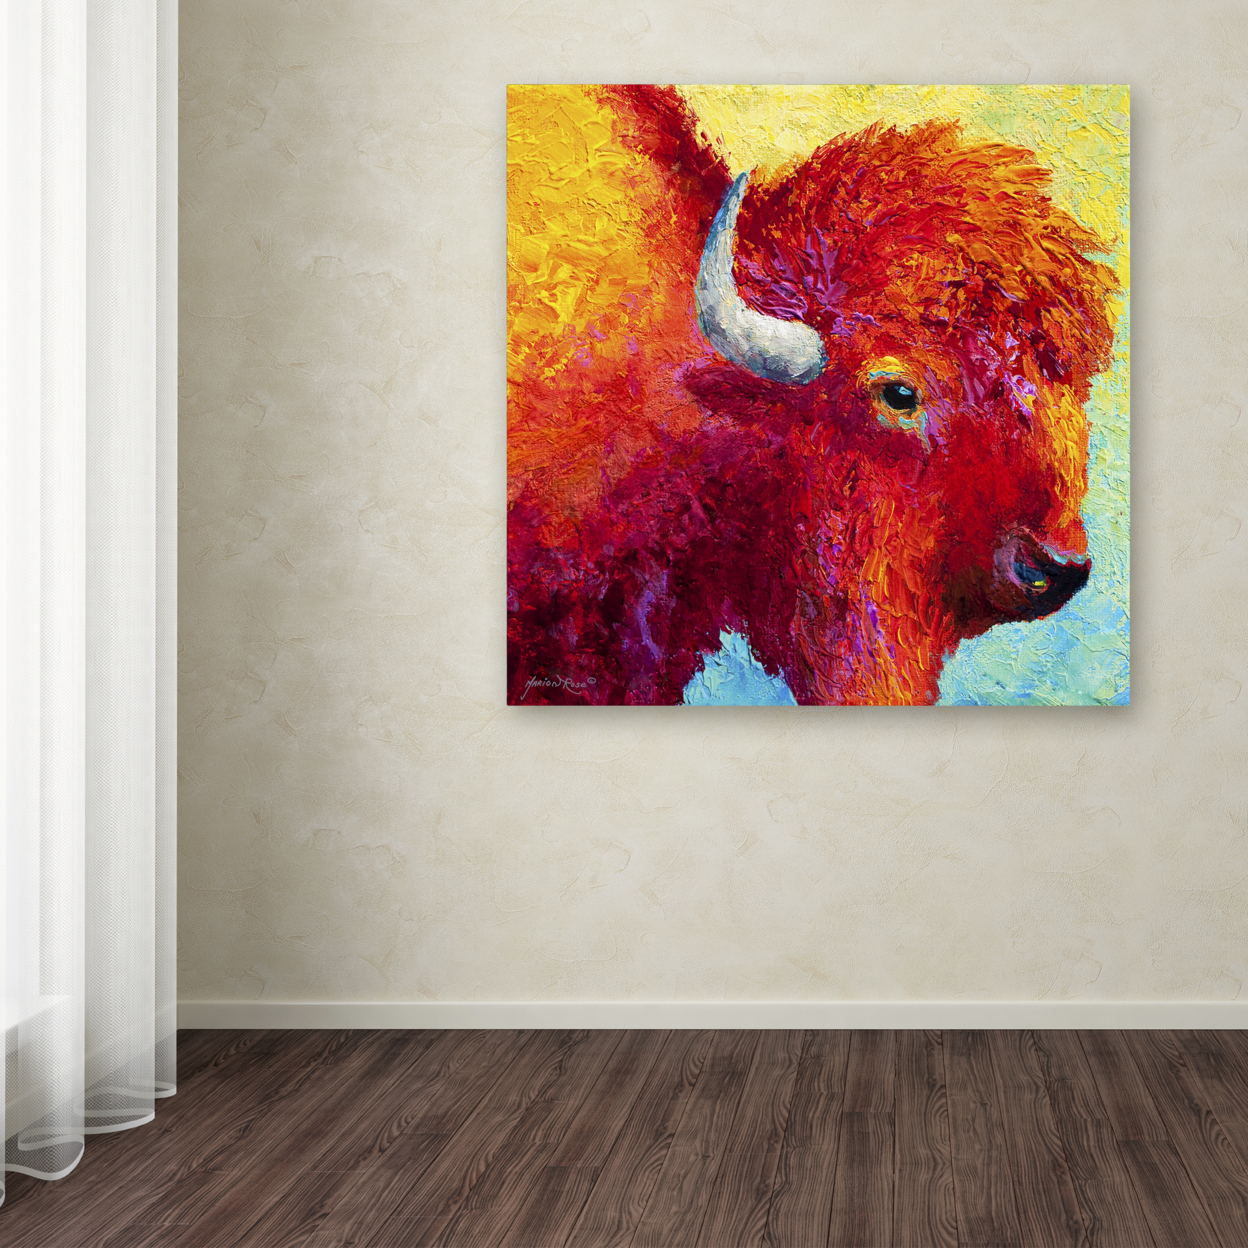 Marion Rose 'Bison Head IV' Ready To Hang Canvas Art 18 X 18 Inches Made In USA